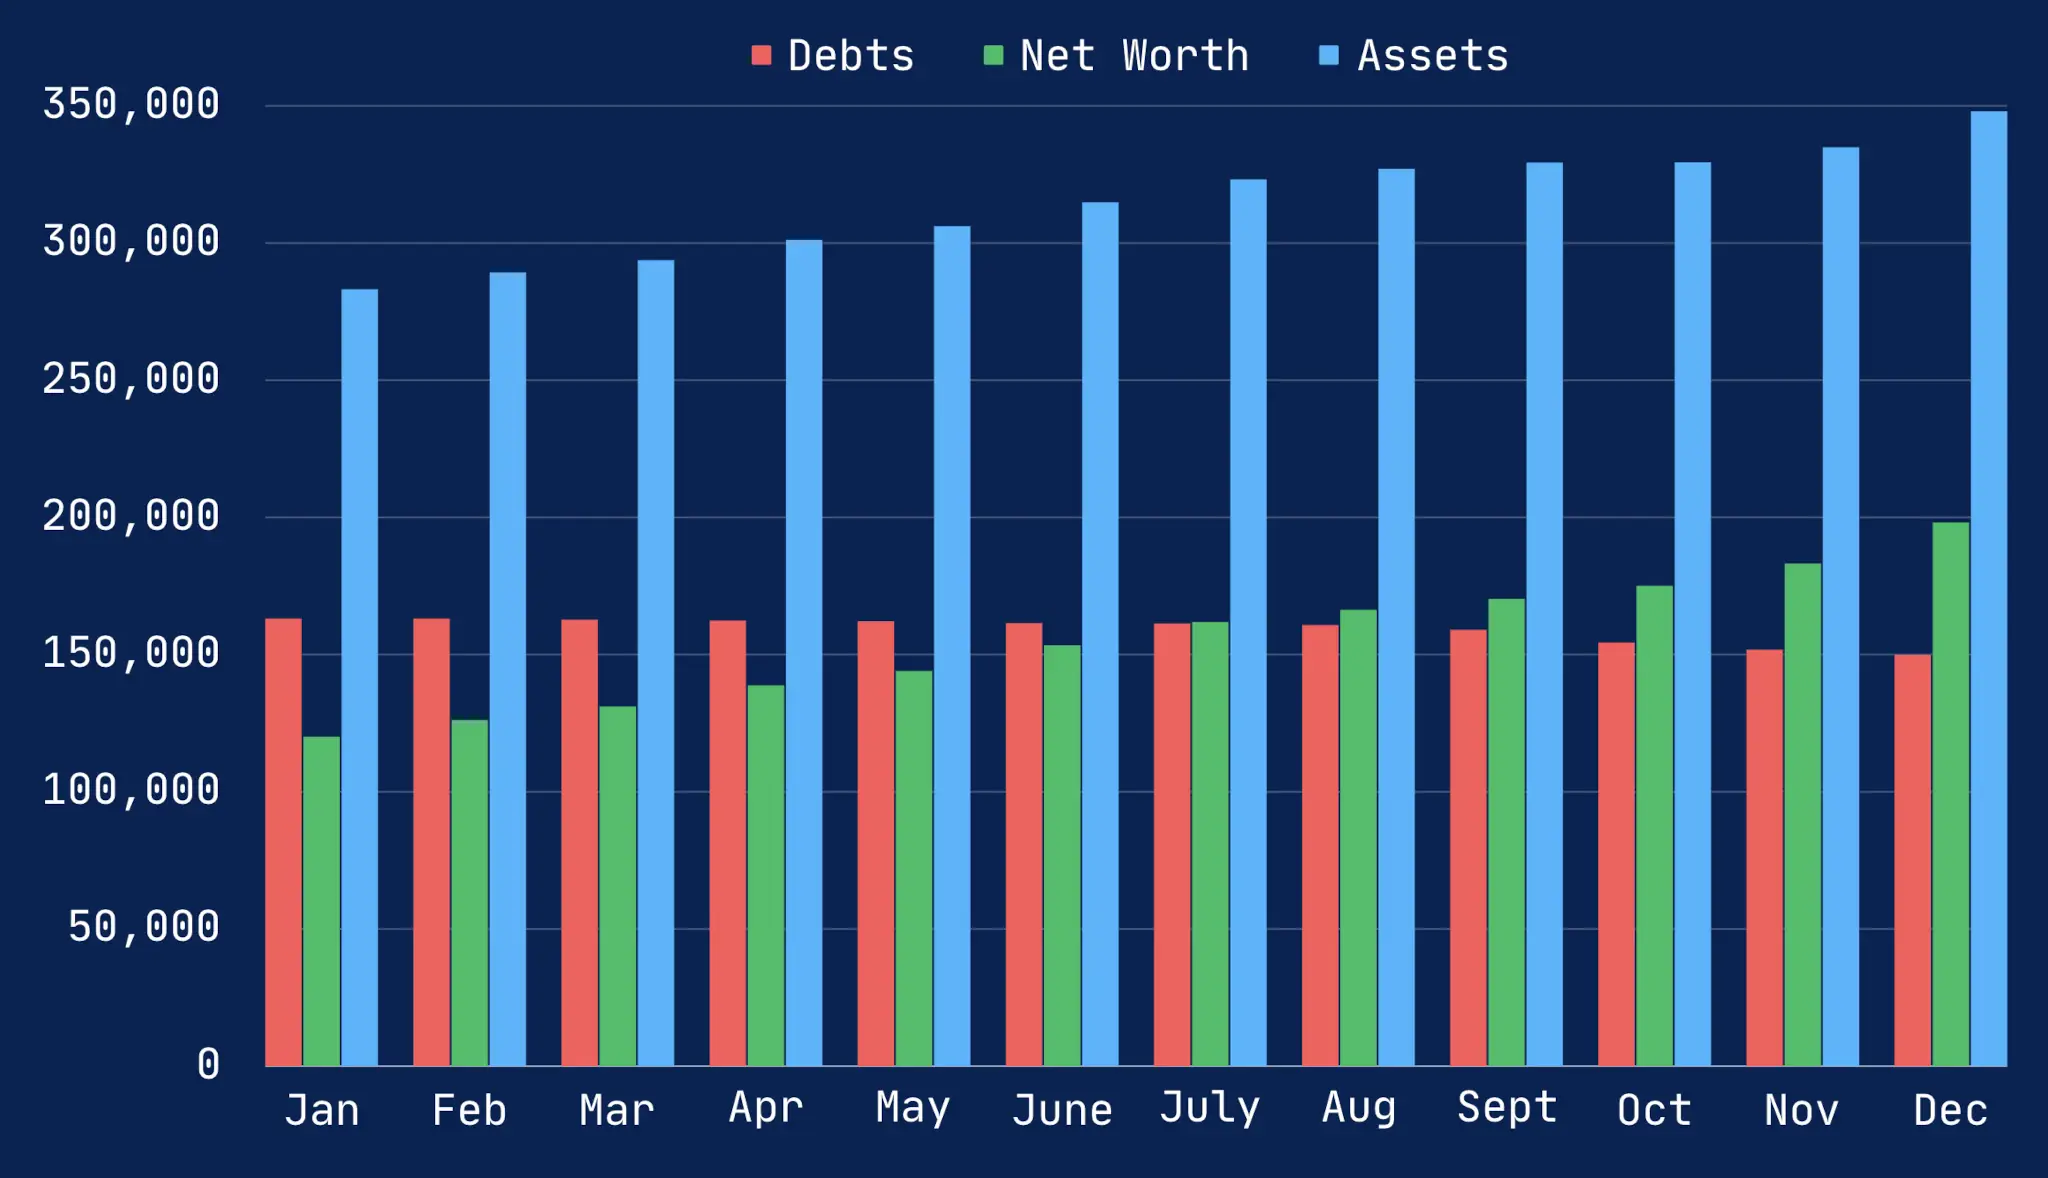 Bar chart showing debts, assets, and net worth.